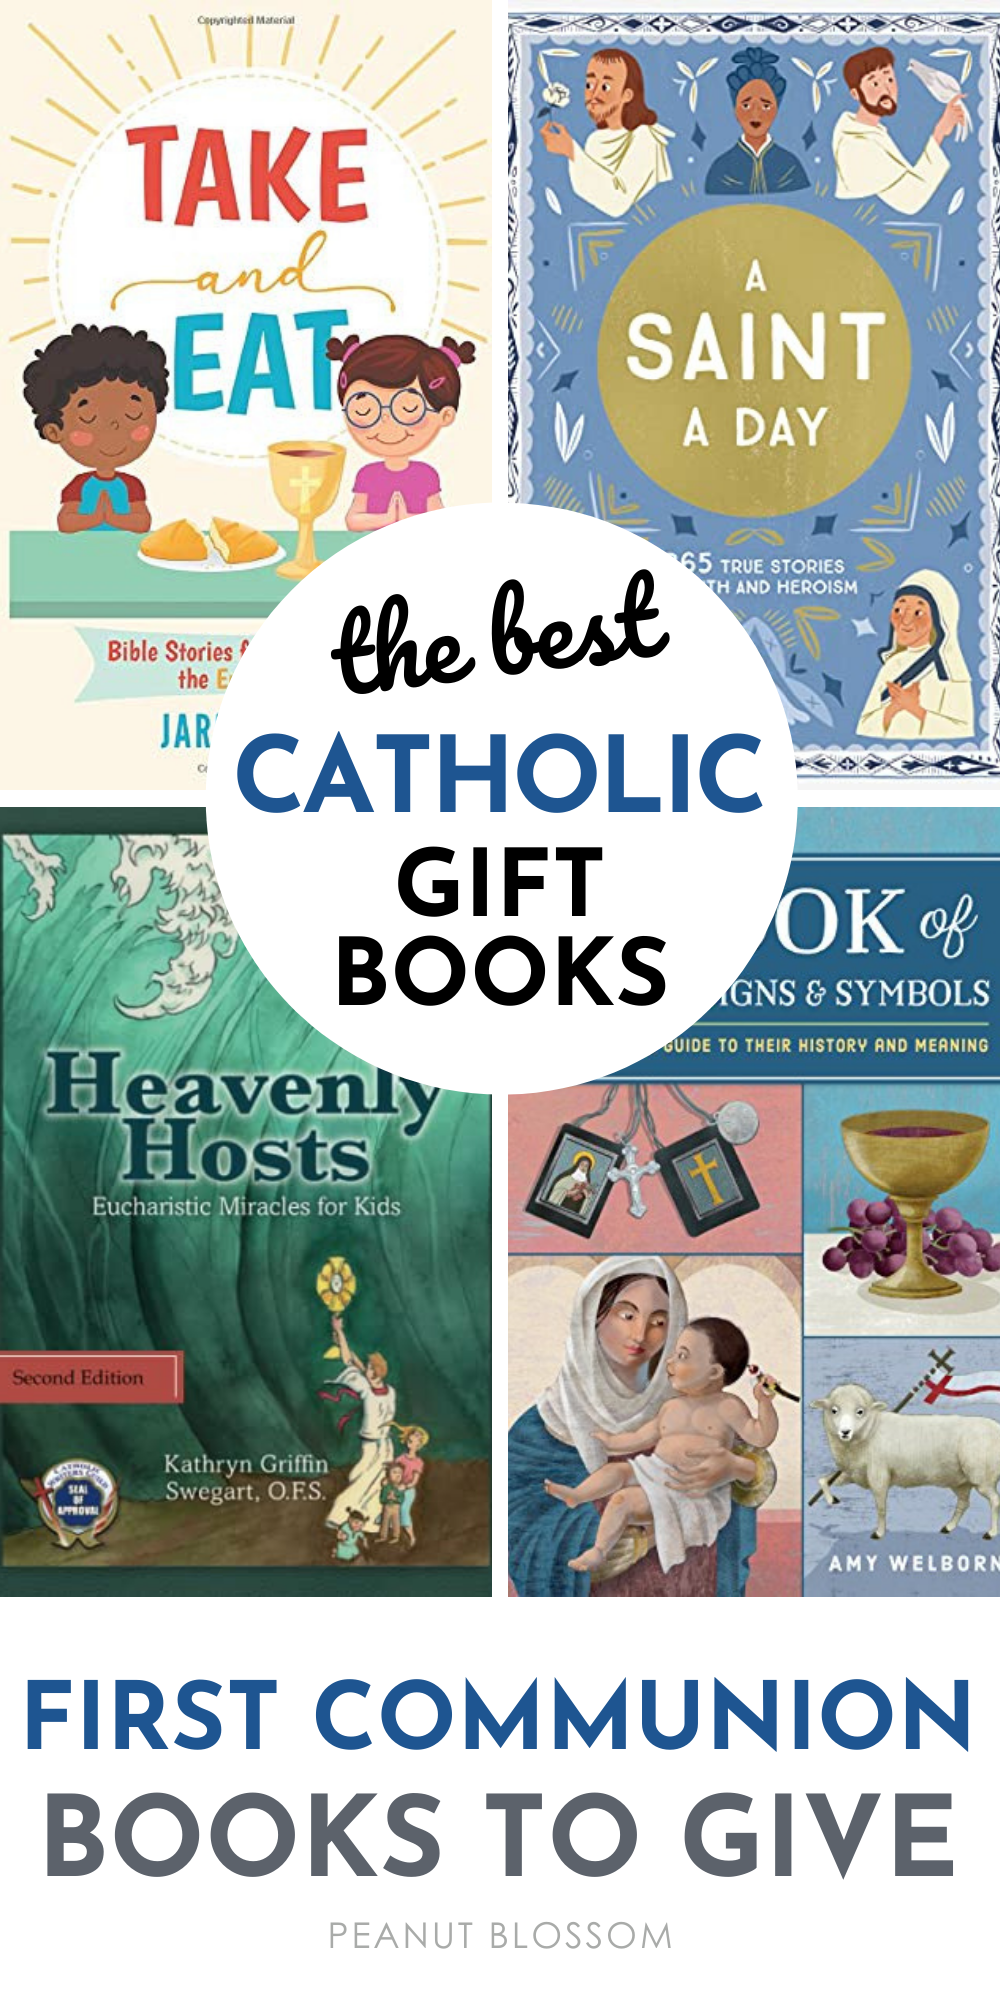 A collage shows the covers of several First Communion books for kids.